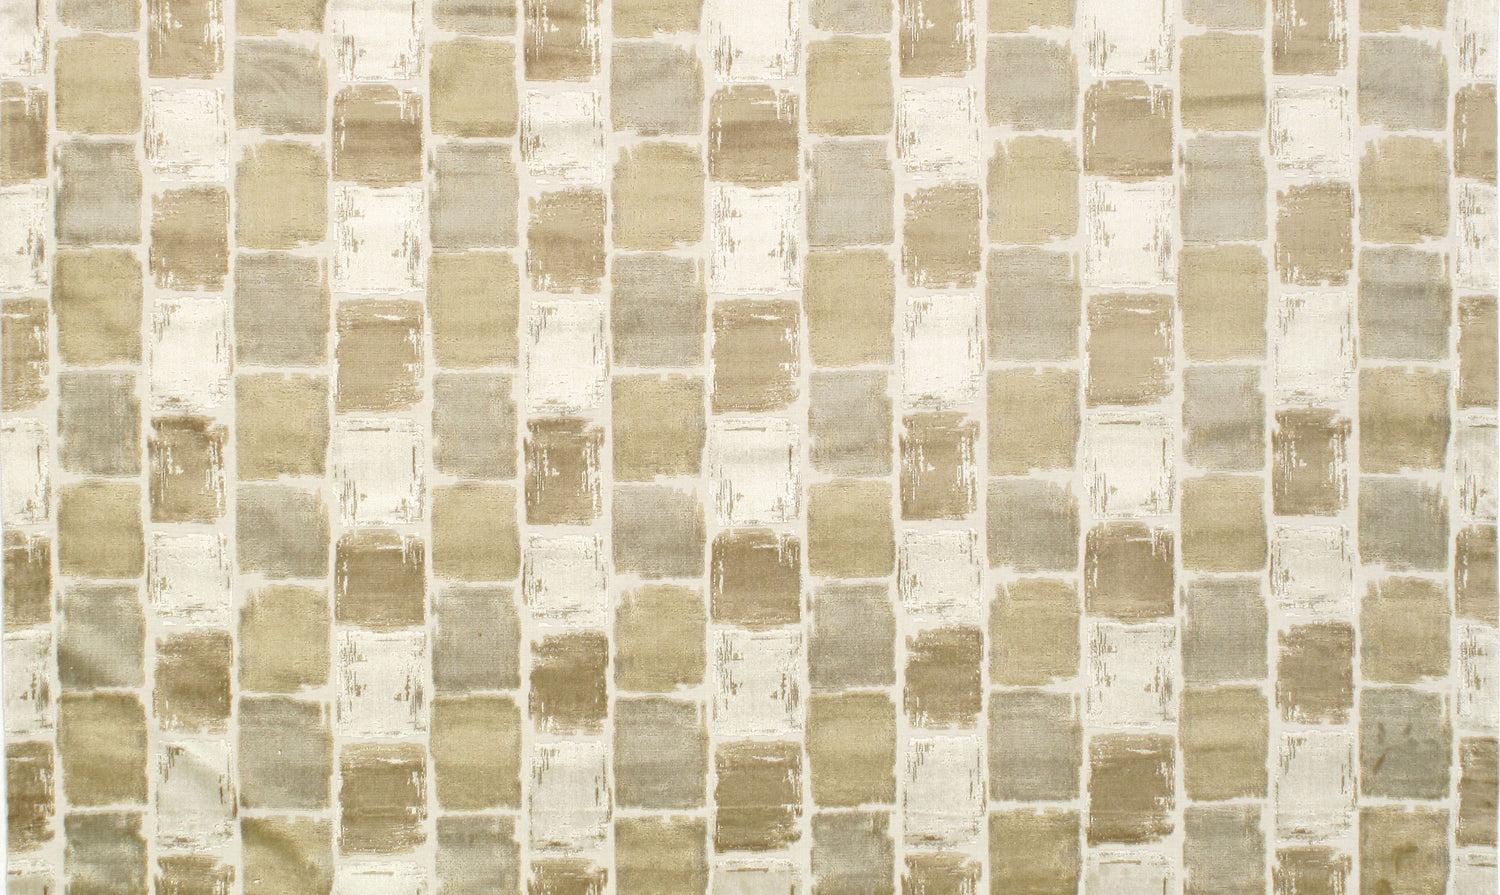 Castellina fabric in travertine color - pattern number V4 00013719 - by Scalamandre in the Old World Weavers collection